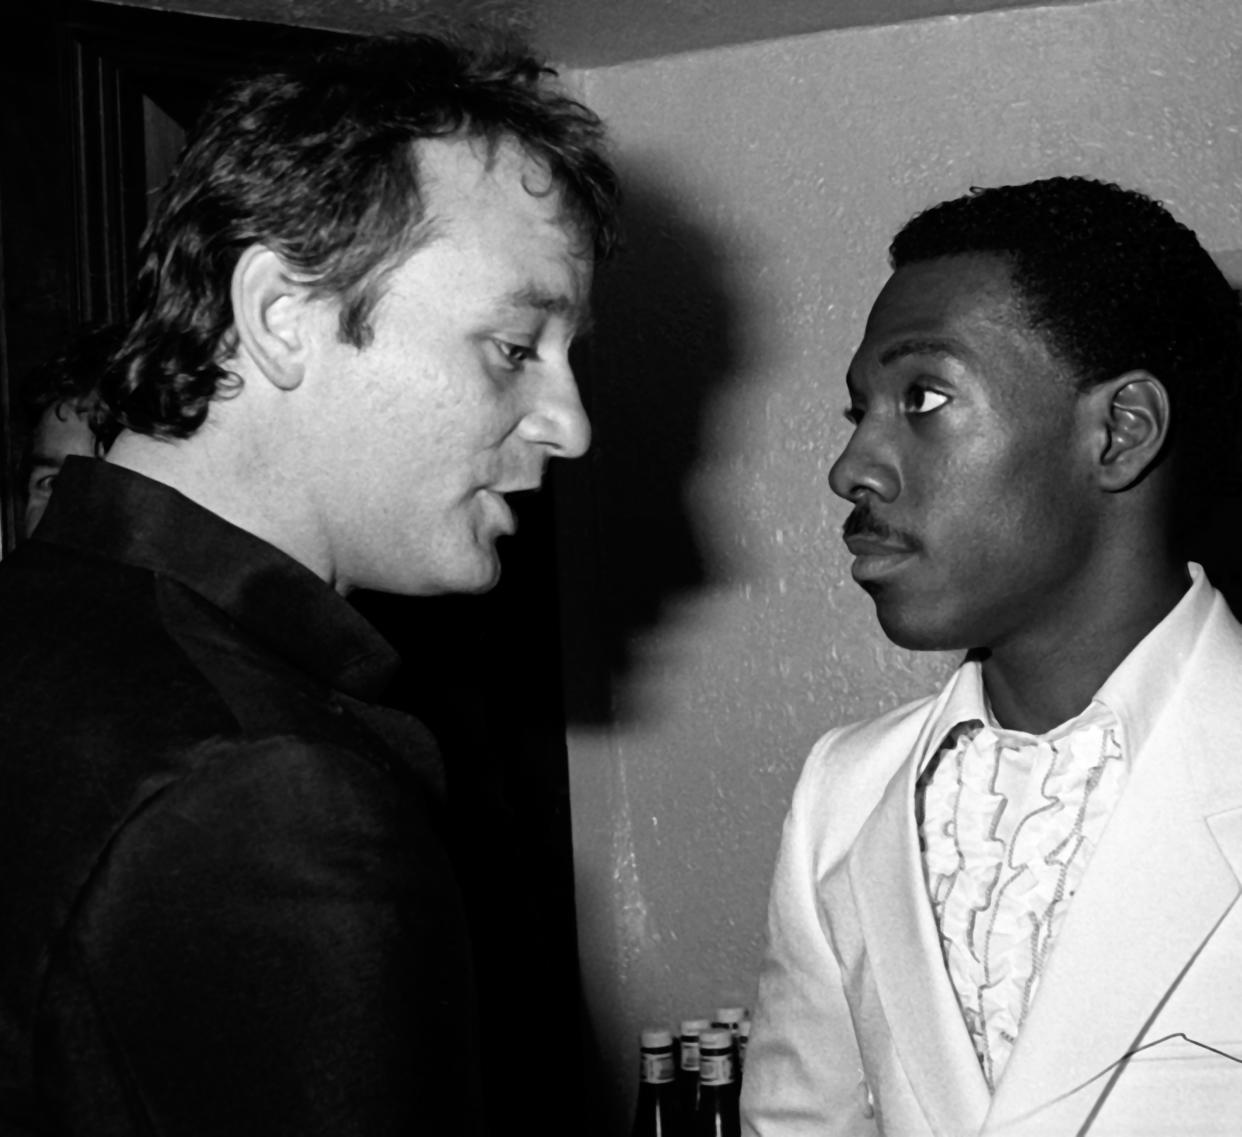 NEW YORK CITY - MARCH 12:  Bill Murray and Eddie Murphy attend Hard Rock Cafe Grand Opening on March 12, 1984 in New York City. (Photo by Ron Galella/Ron Galella Collection via Getty Images)